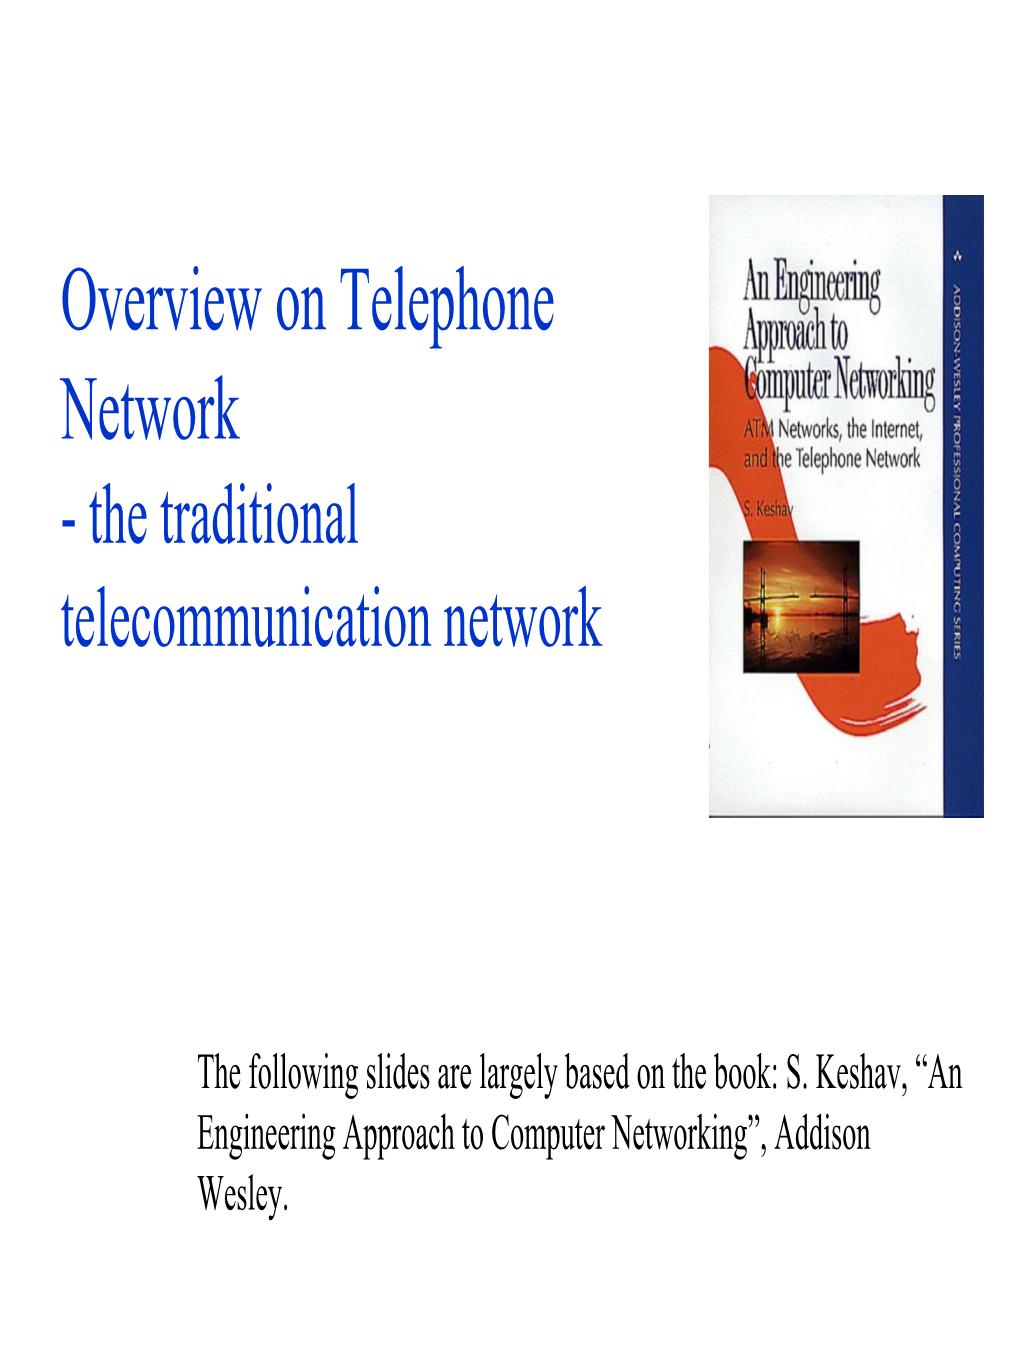 Overview on Telephone Network - the Traditional Telecommunication Network